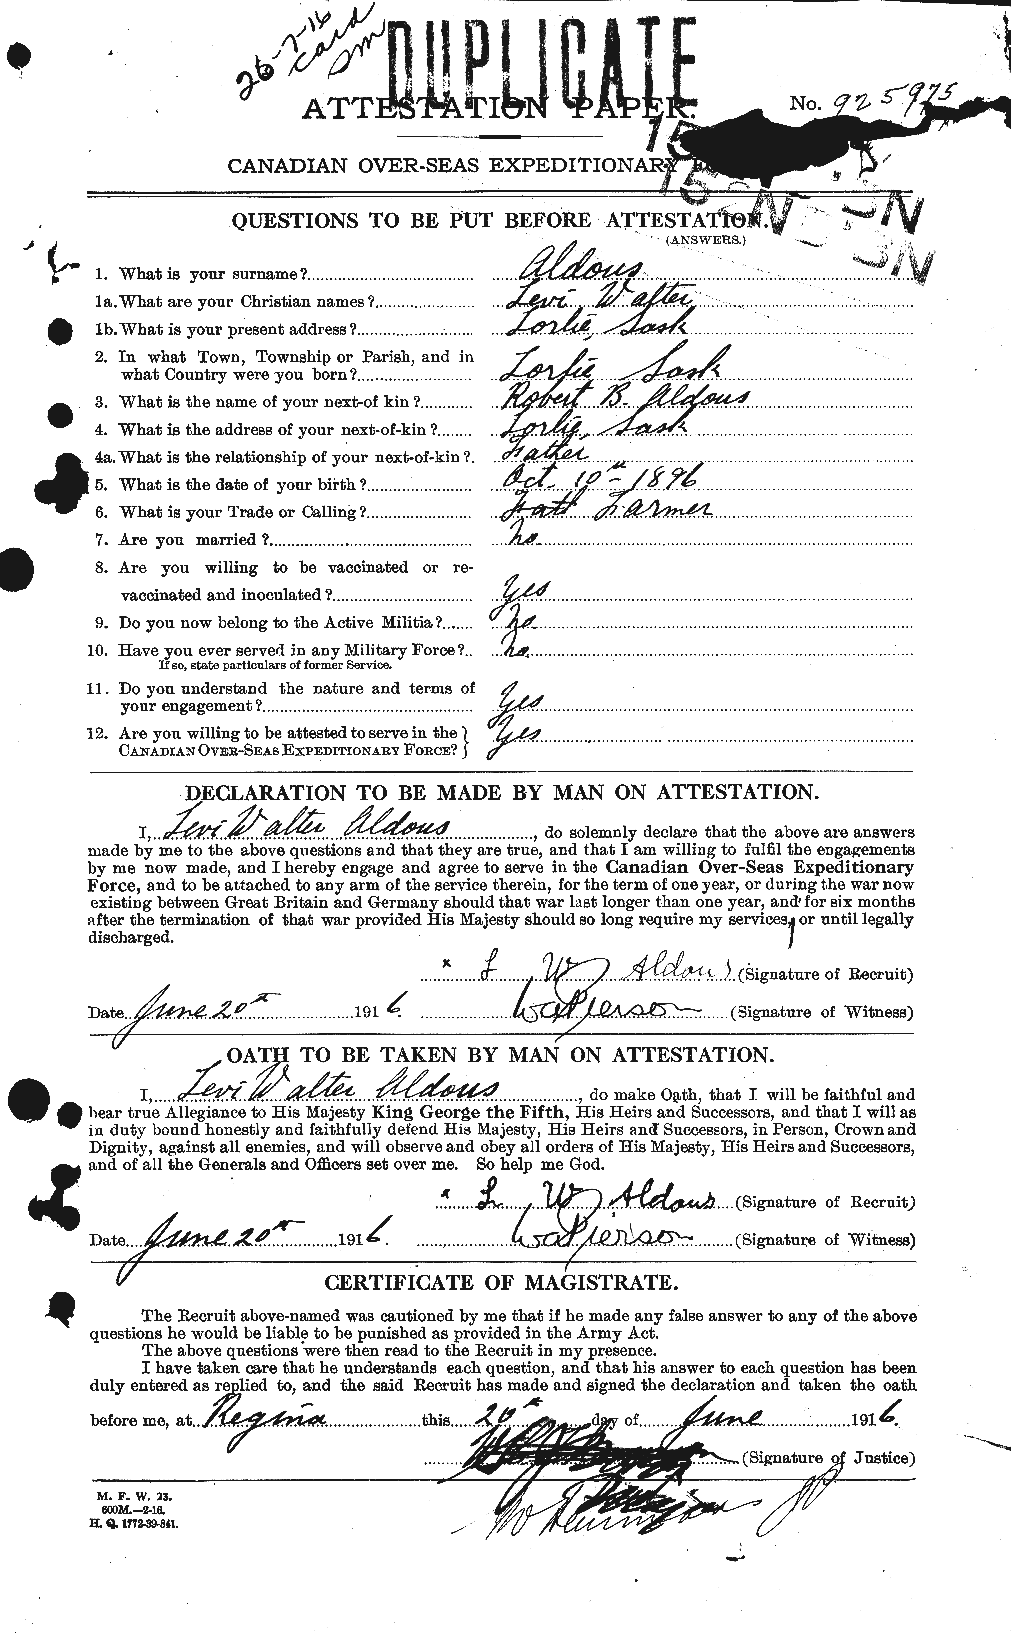 Personnel Records of the First World War - CEF 204925a